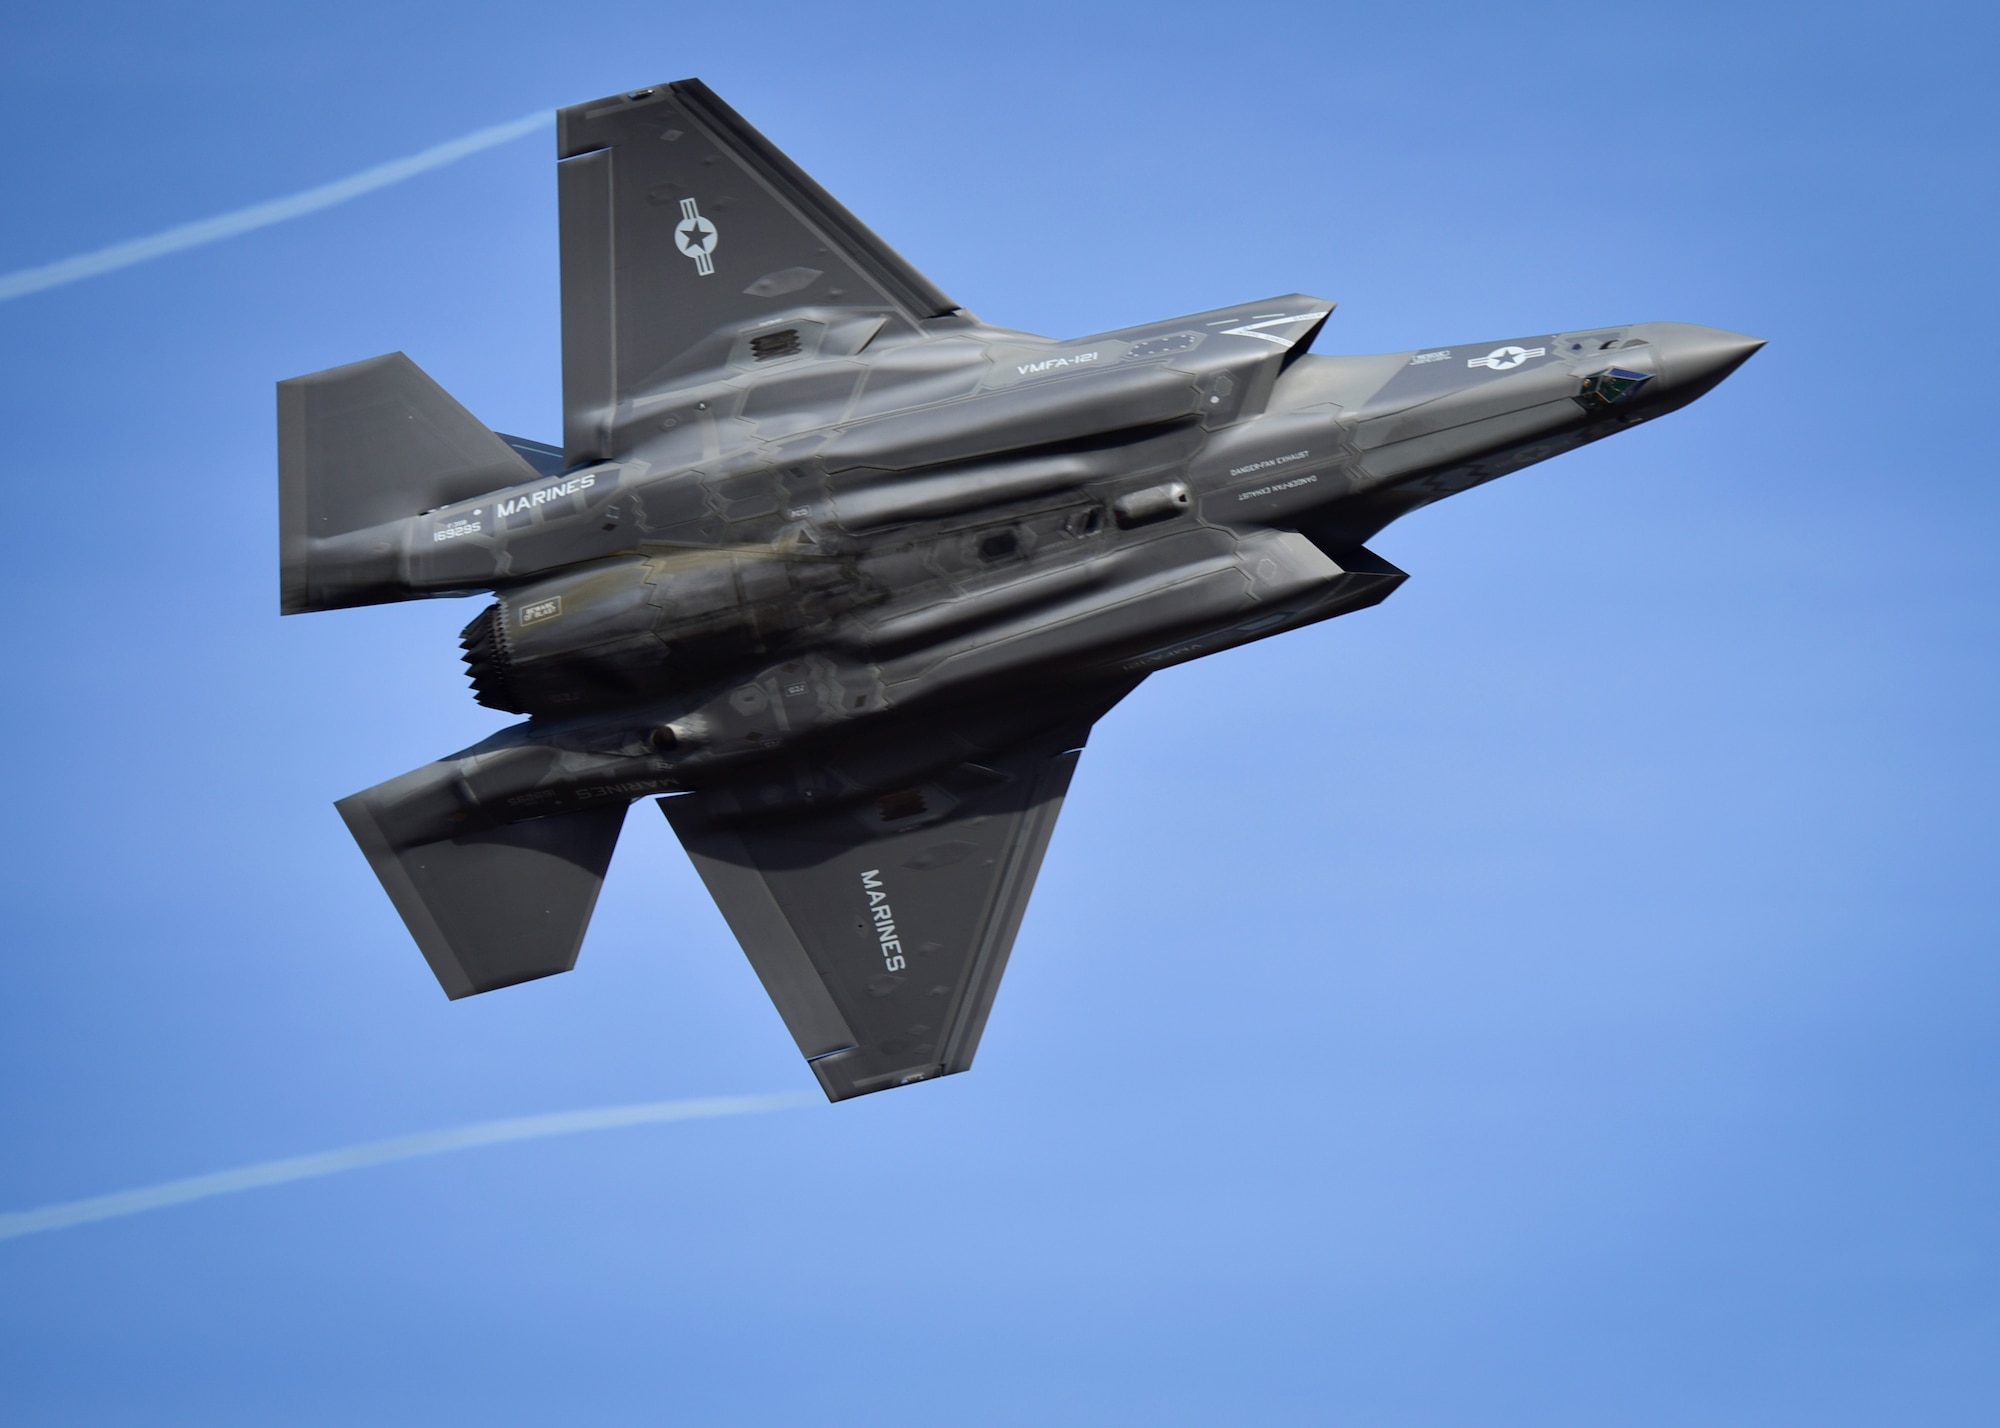 A U.S. Marine Corps F-35 Lighting II attached to Marine Fighter Attack Squadron 121 from Marine Corps Air Station Iwakuni, Japan, takes off for a training mission during Northern Edge, May 2, 2017. Northern Edge 2017 is Alaska's premiere joint-training exercise designed to practice operations, techniques, and procedures as well as enhance interoperability among the services. Thousands of participants from all the services; Airmen, Soldiers, Sailors, Marines, and Coast Guard personnel from active duty, Reserve and National Guard units, are involved. 